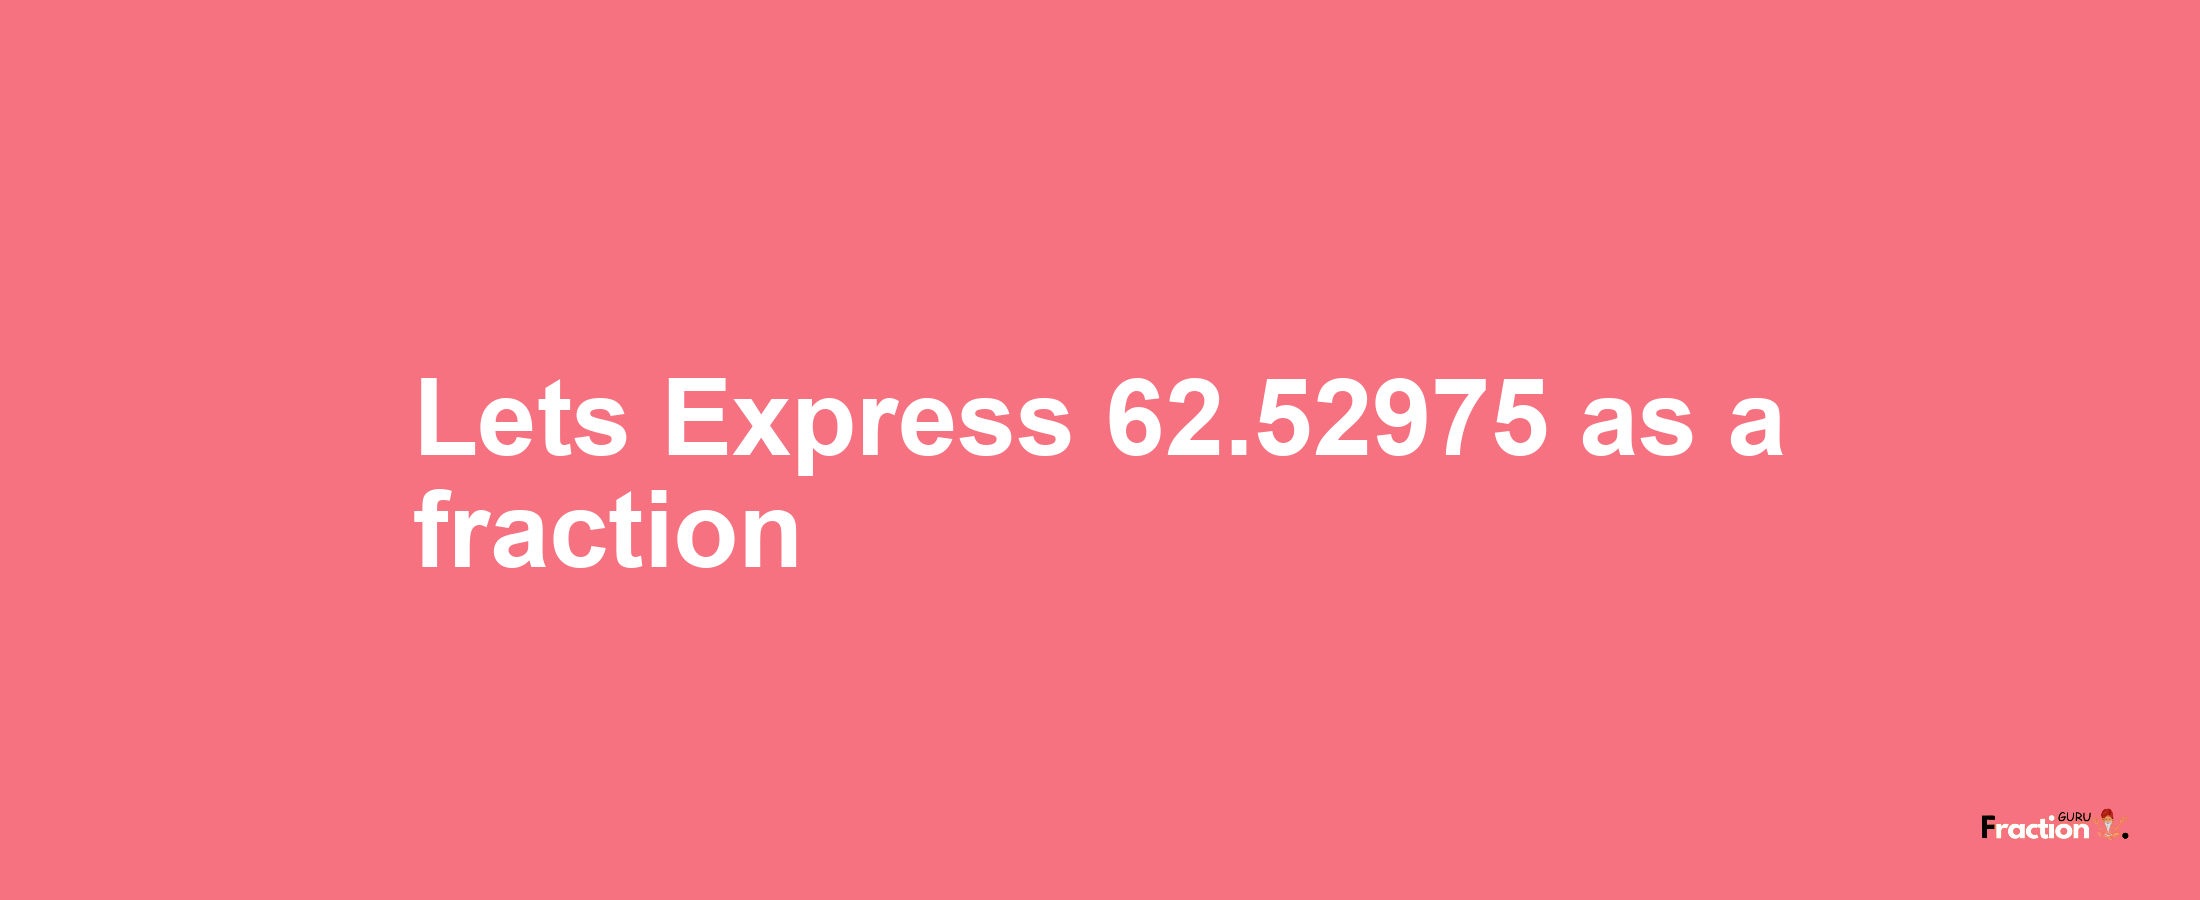 Lets Express 62.52975 as afraction